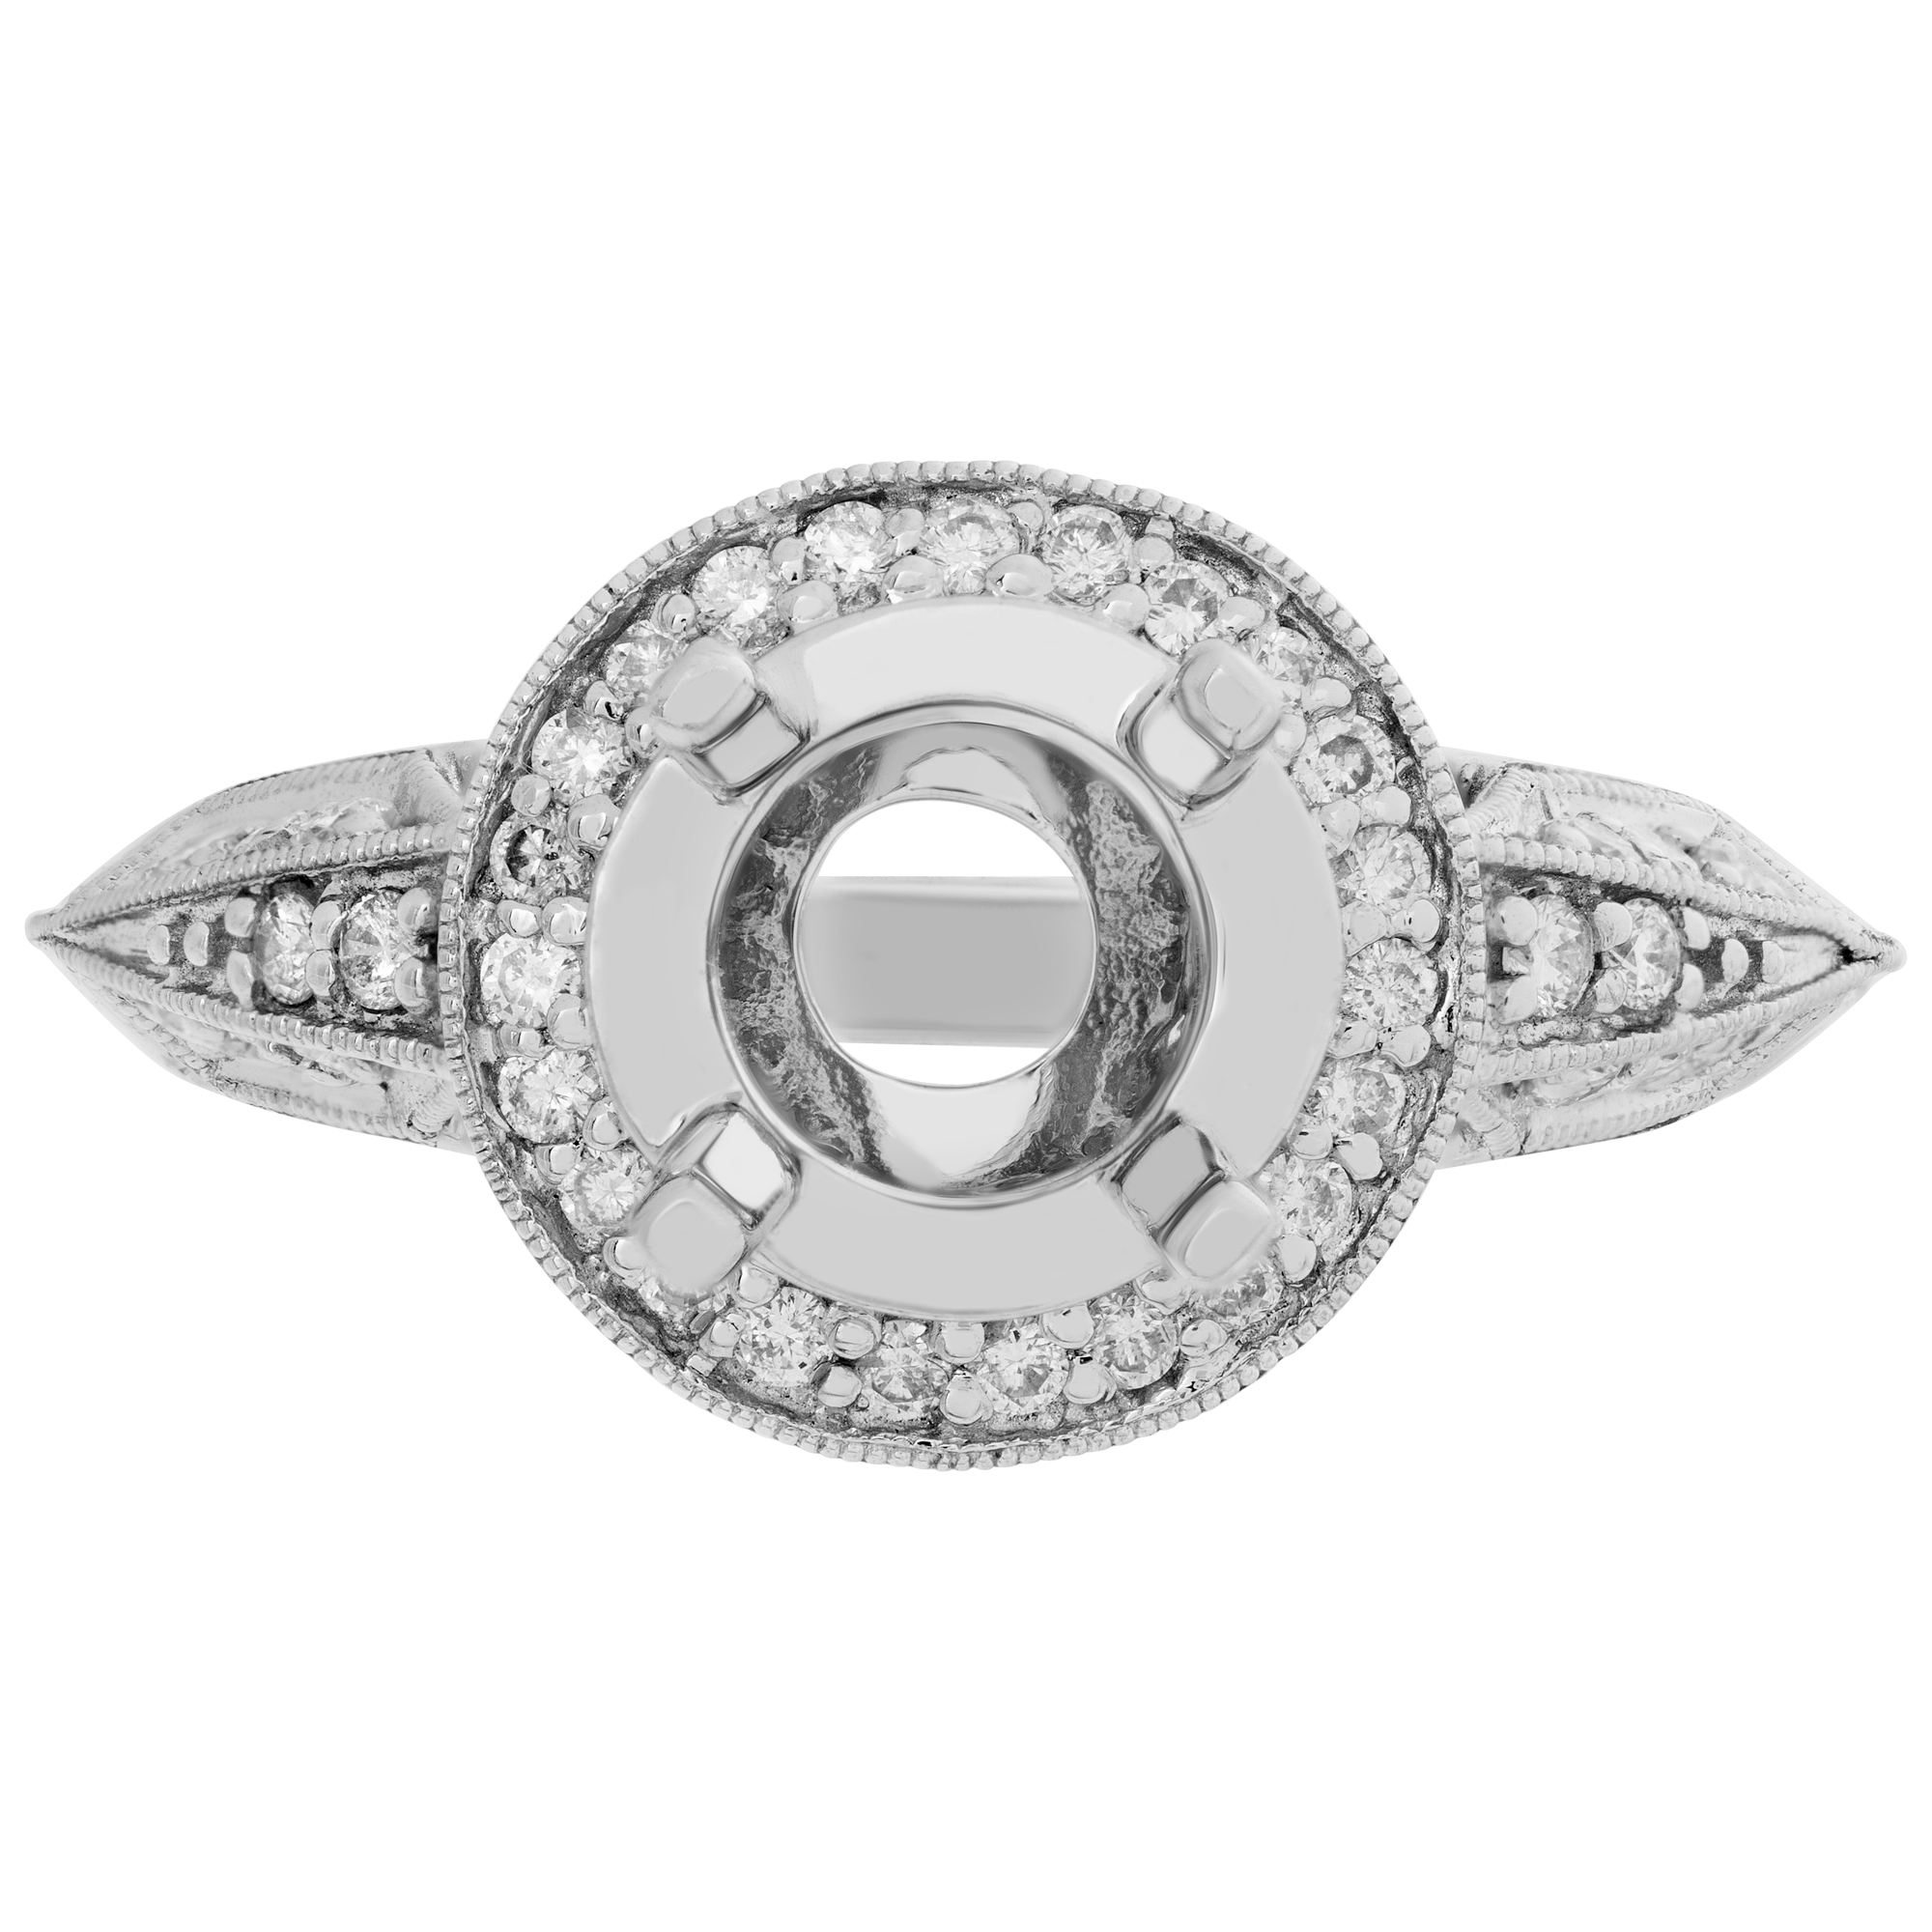 18k white gold round diamond pave setting; 1.09 cts in diamonds (H,SI1) image 2